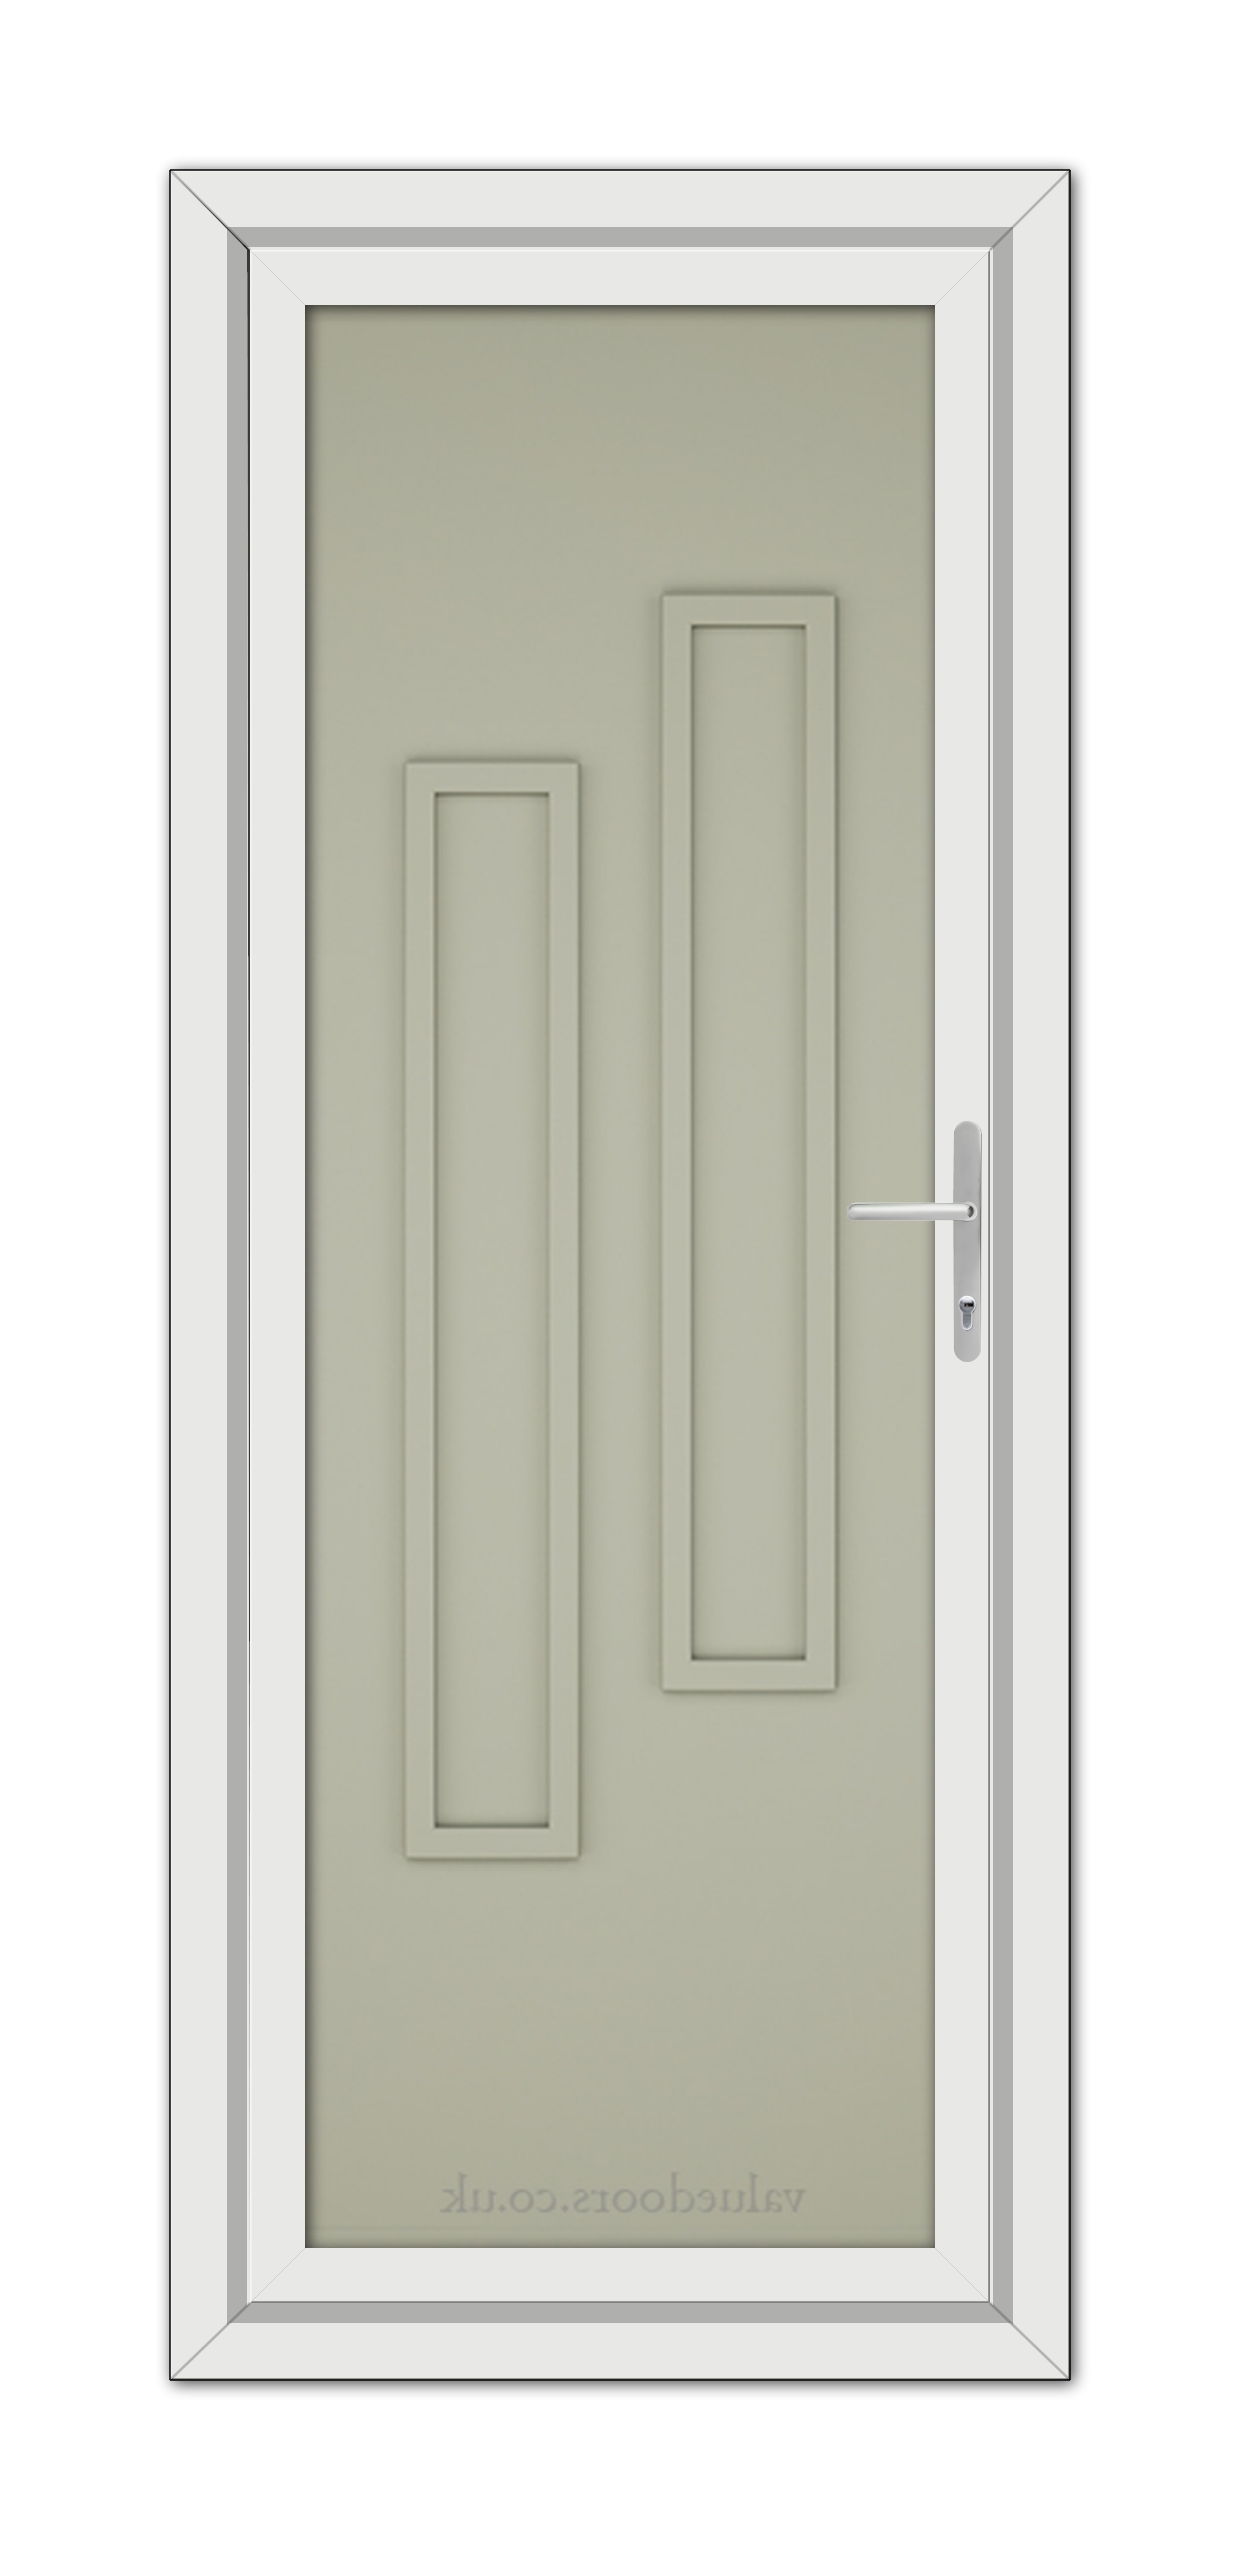 Corrected Sentence: An Agate Grey Modern 5082 Solid uPVC door with a white frame, featuring two vertical panels and a chrome handle, isolated on a white background.